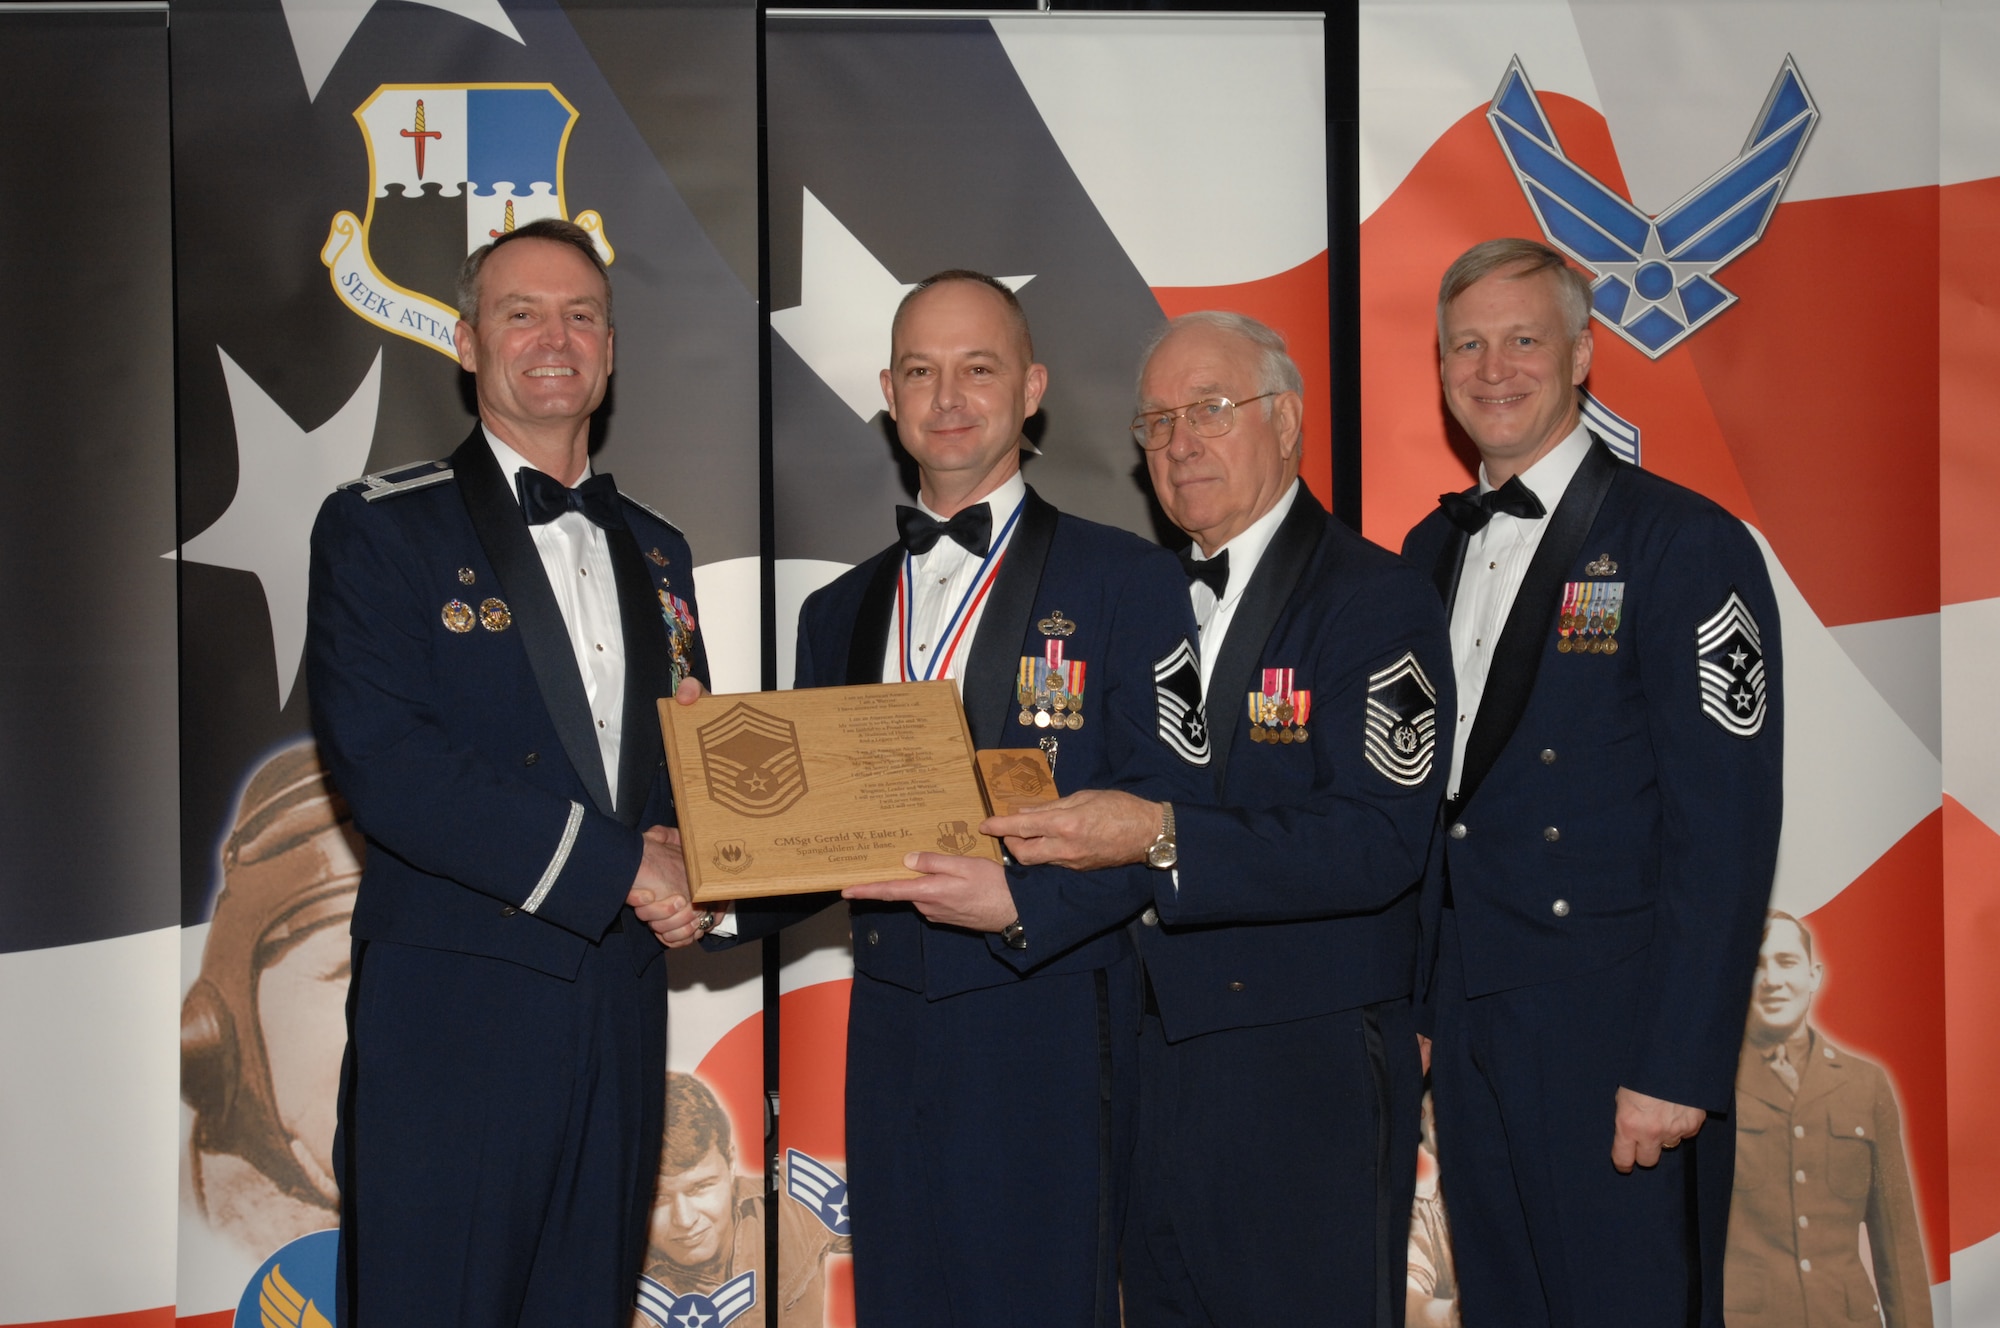 SPANGDAHLEM AIR BASE, Germany – Senior Master Sgt. Jay Euler, 703rd Munitions Maintenance Squadron, receives a plaque from Col. Darryl Roberson, 52nd Fighter Wing commander, Jan. 19, 2008 at Club Eifel. The plaque recognizes him as new chief master sergeant select. Sergeant Euler was also congratulated by retired Chief Master Sgt. of the Air Force Sam Parish and Chief Master Sgt. Vance Clarke, 52nd FW command chief. (U.S. Air Force photo/Airman 1st Class Jenifer Calhoun)